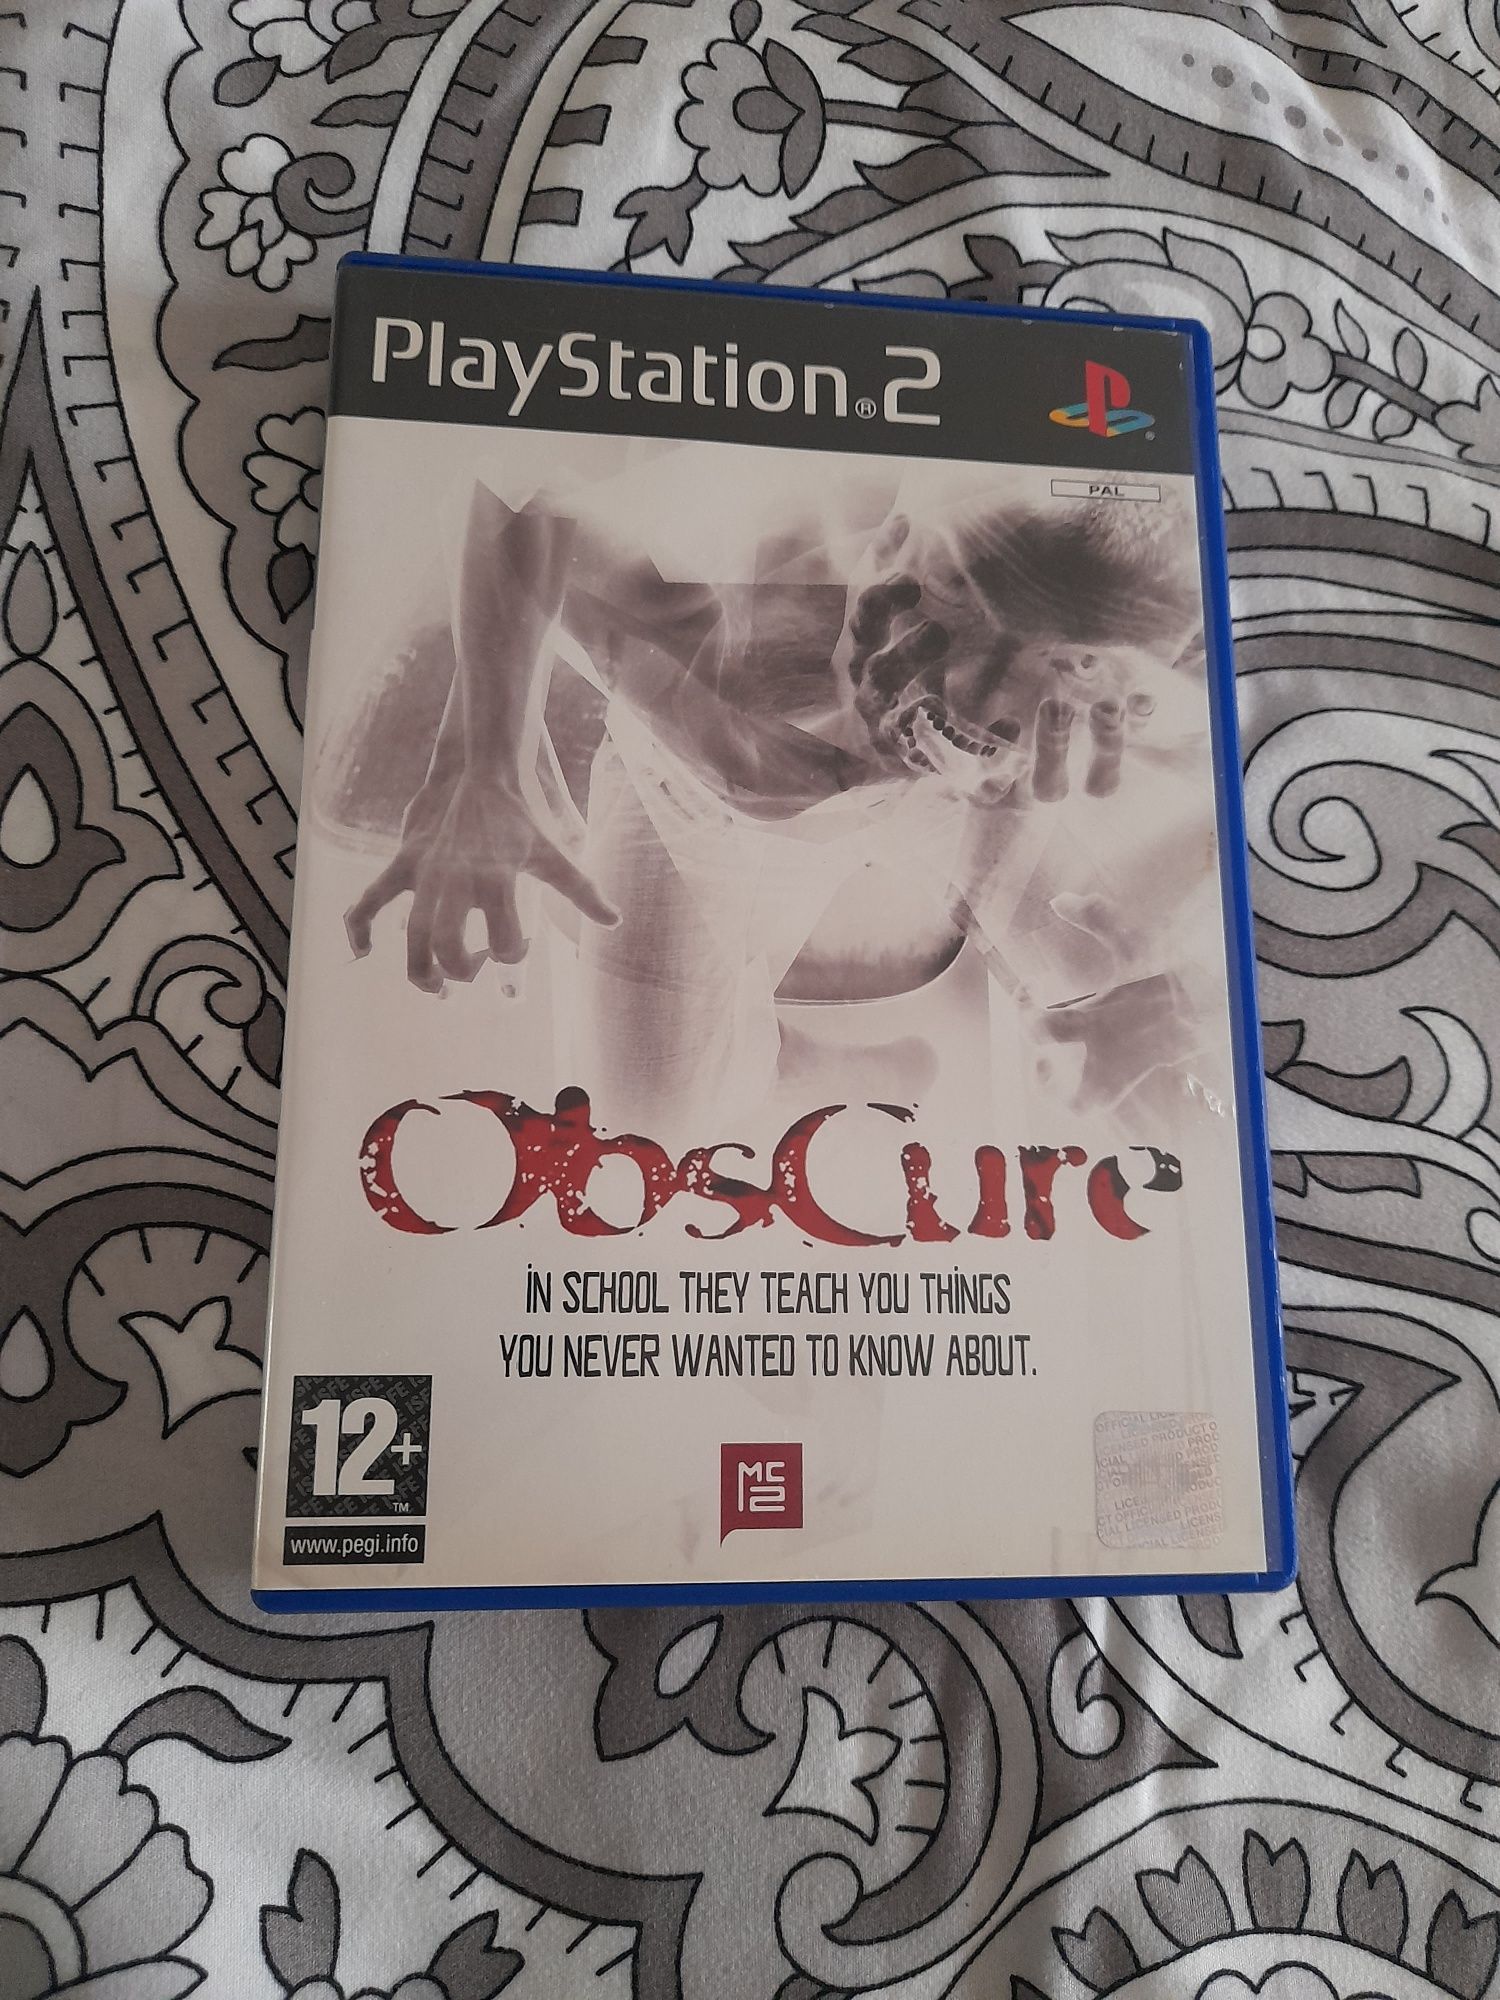 Obscure Playstation2